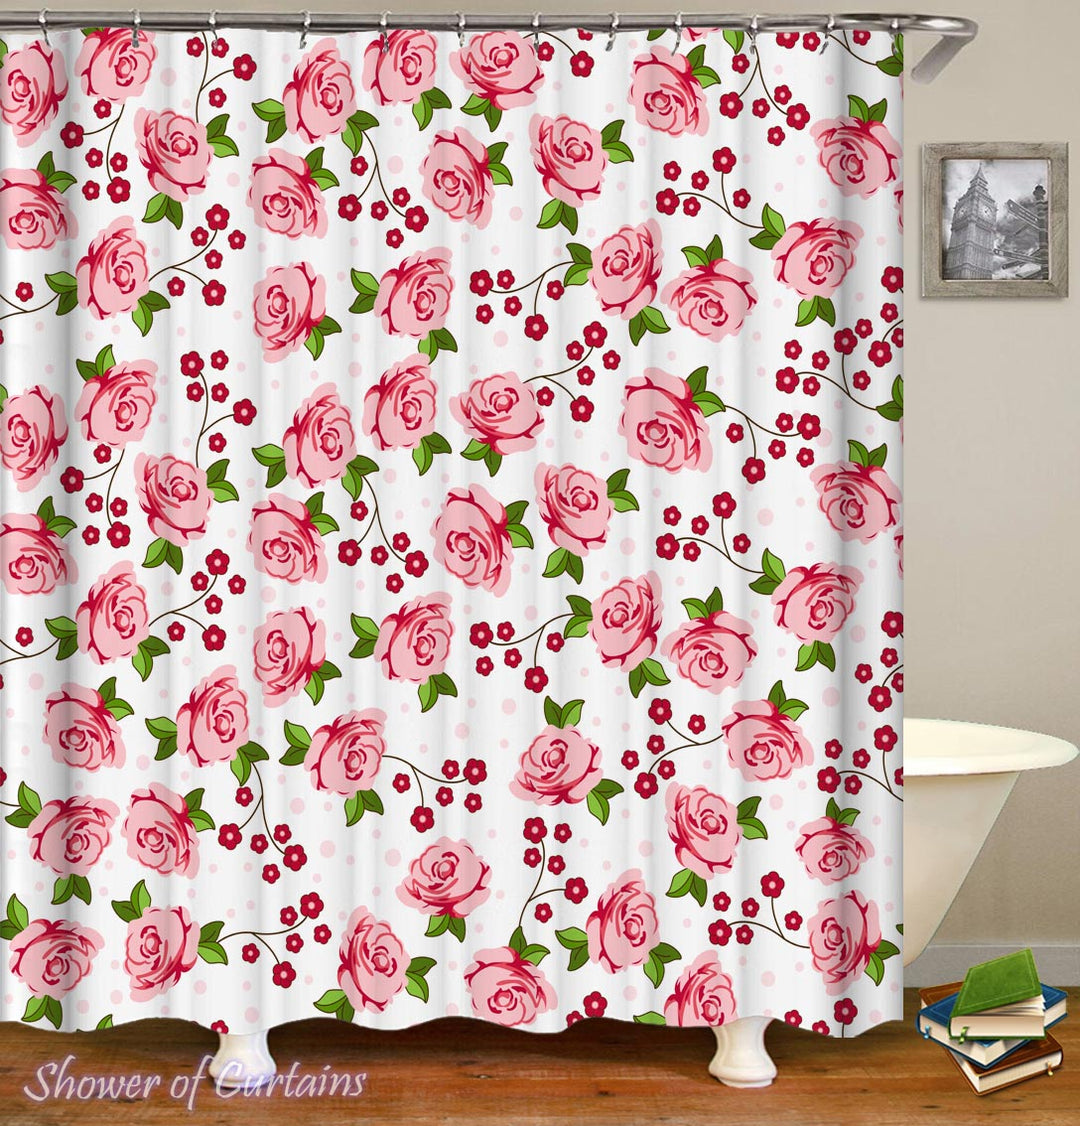 Shower Curtain of Pinkish Roses Pattern